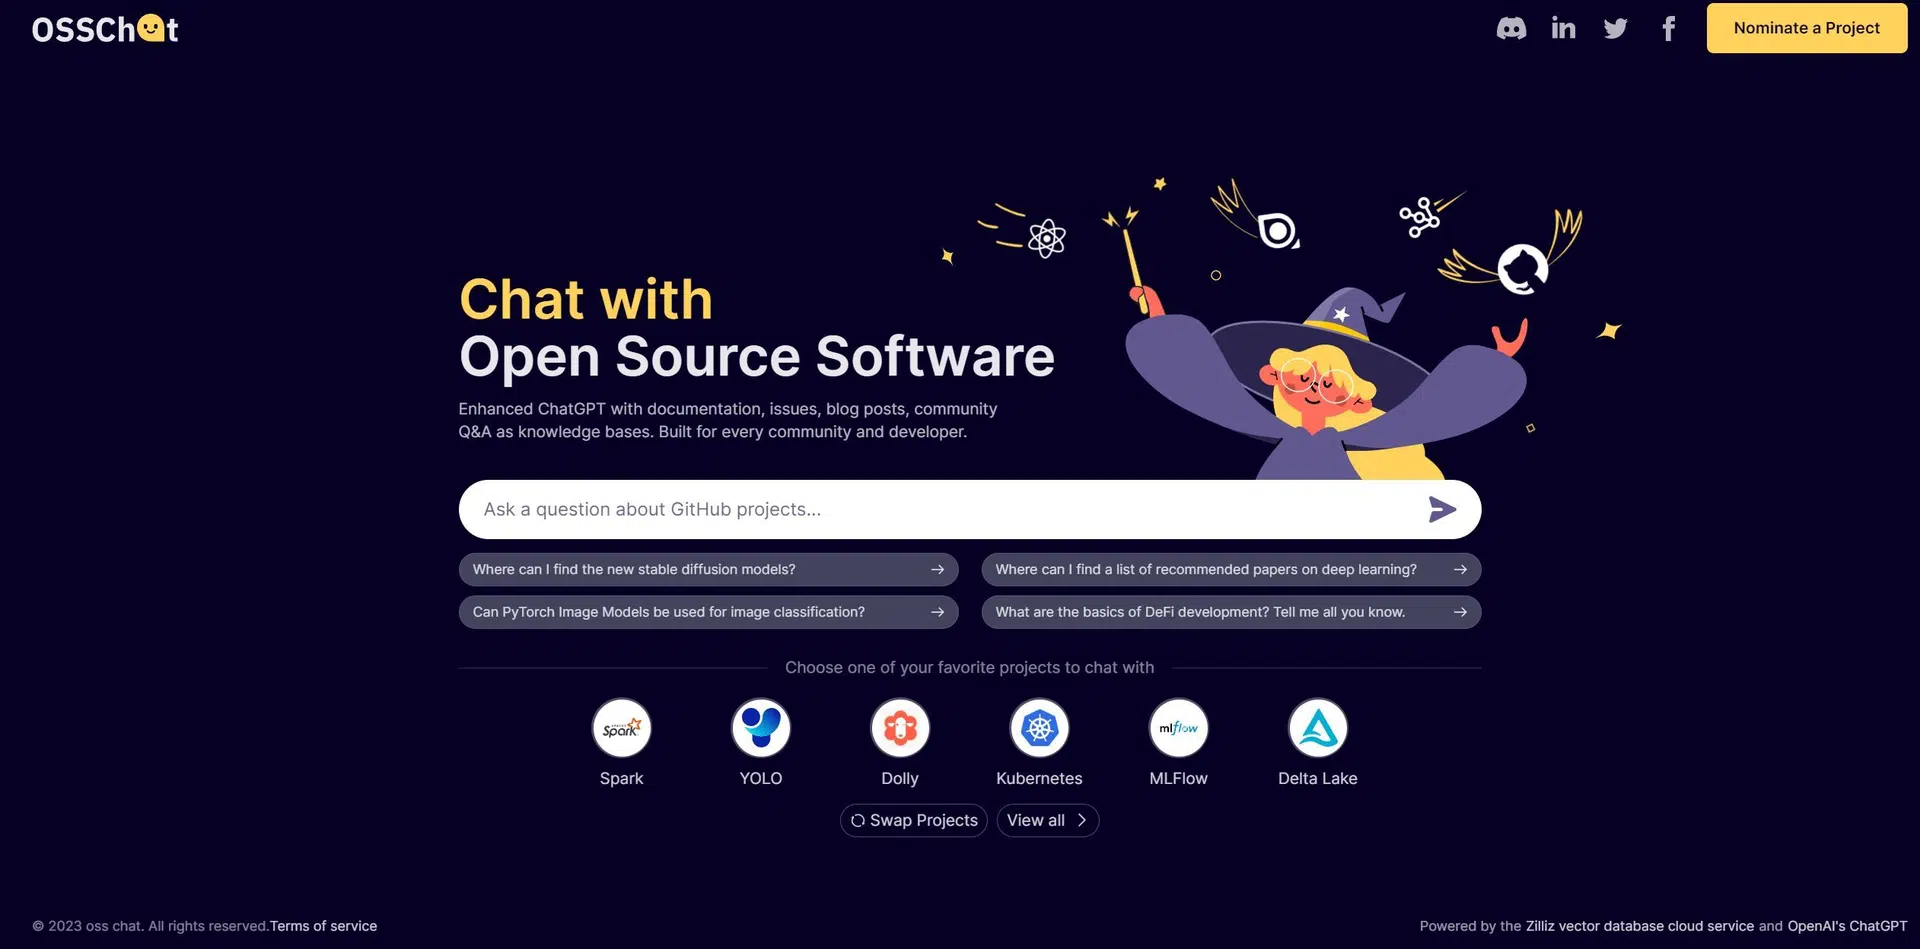 OSS Chatwebsite picture